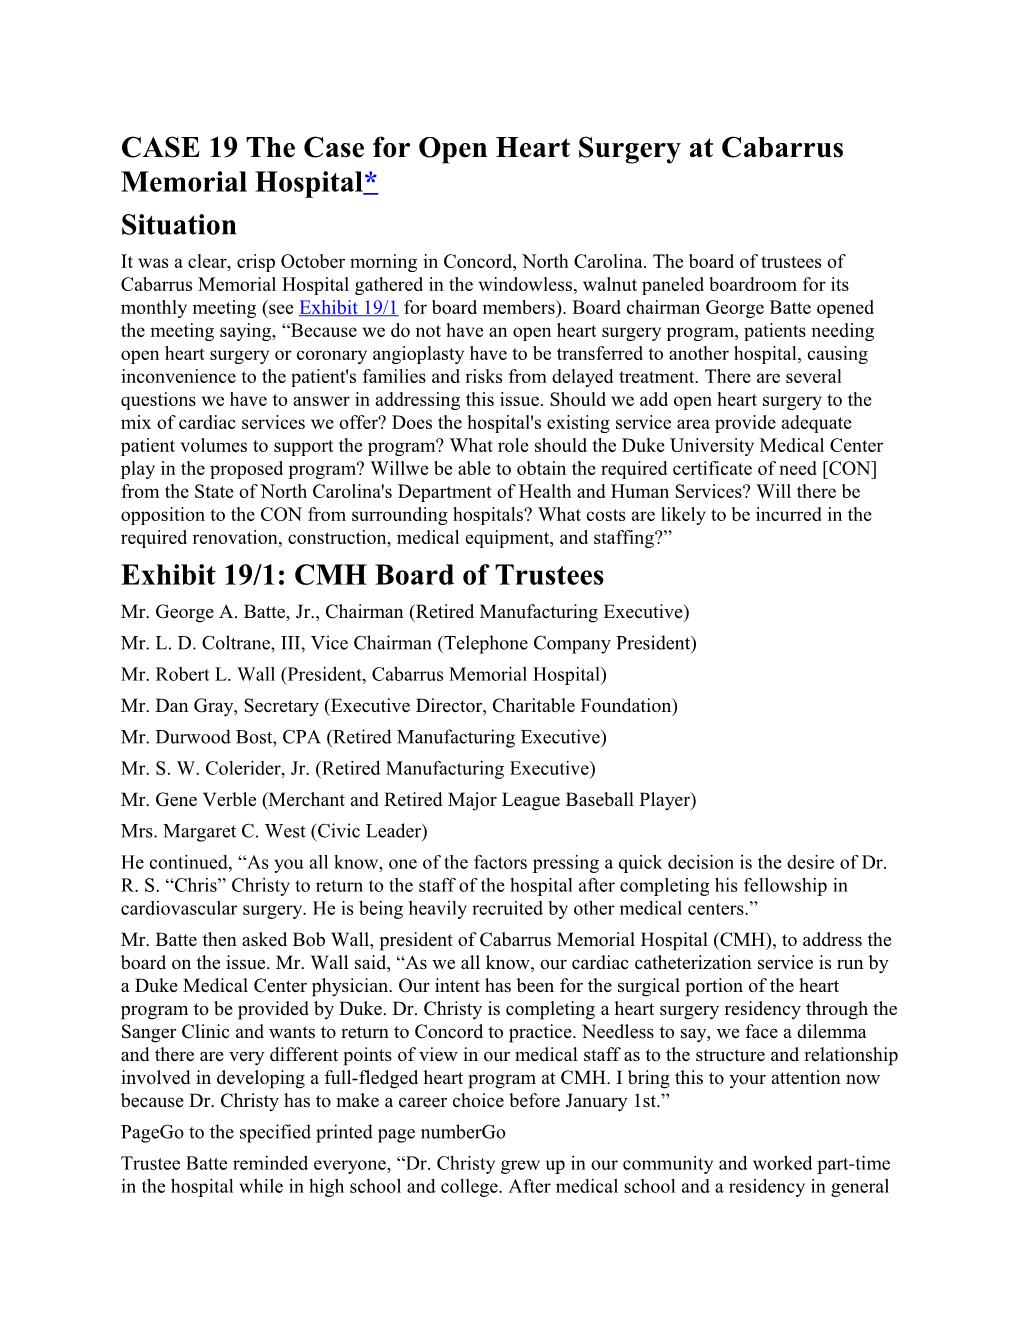 CASE 19 the Case for Open Heart Surgery at Cabarrus Memorial Hospital *